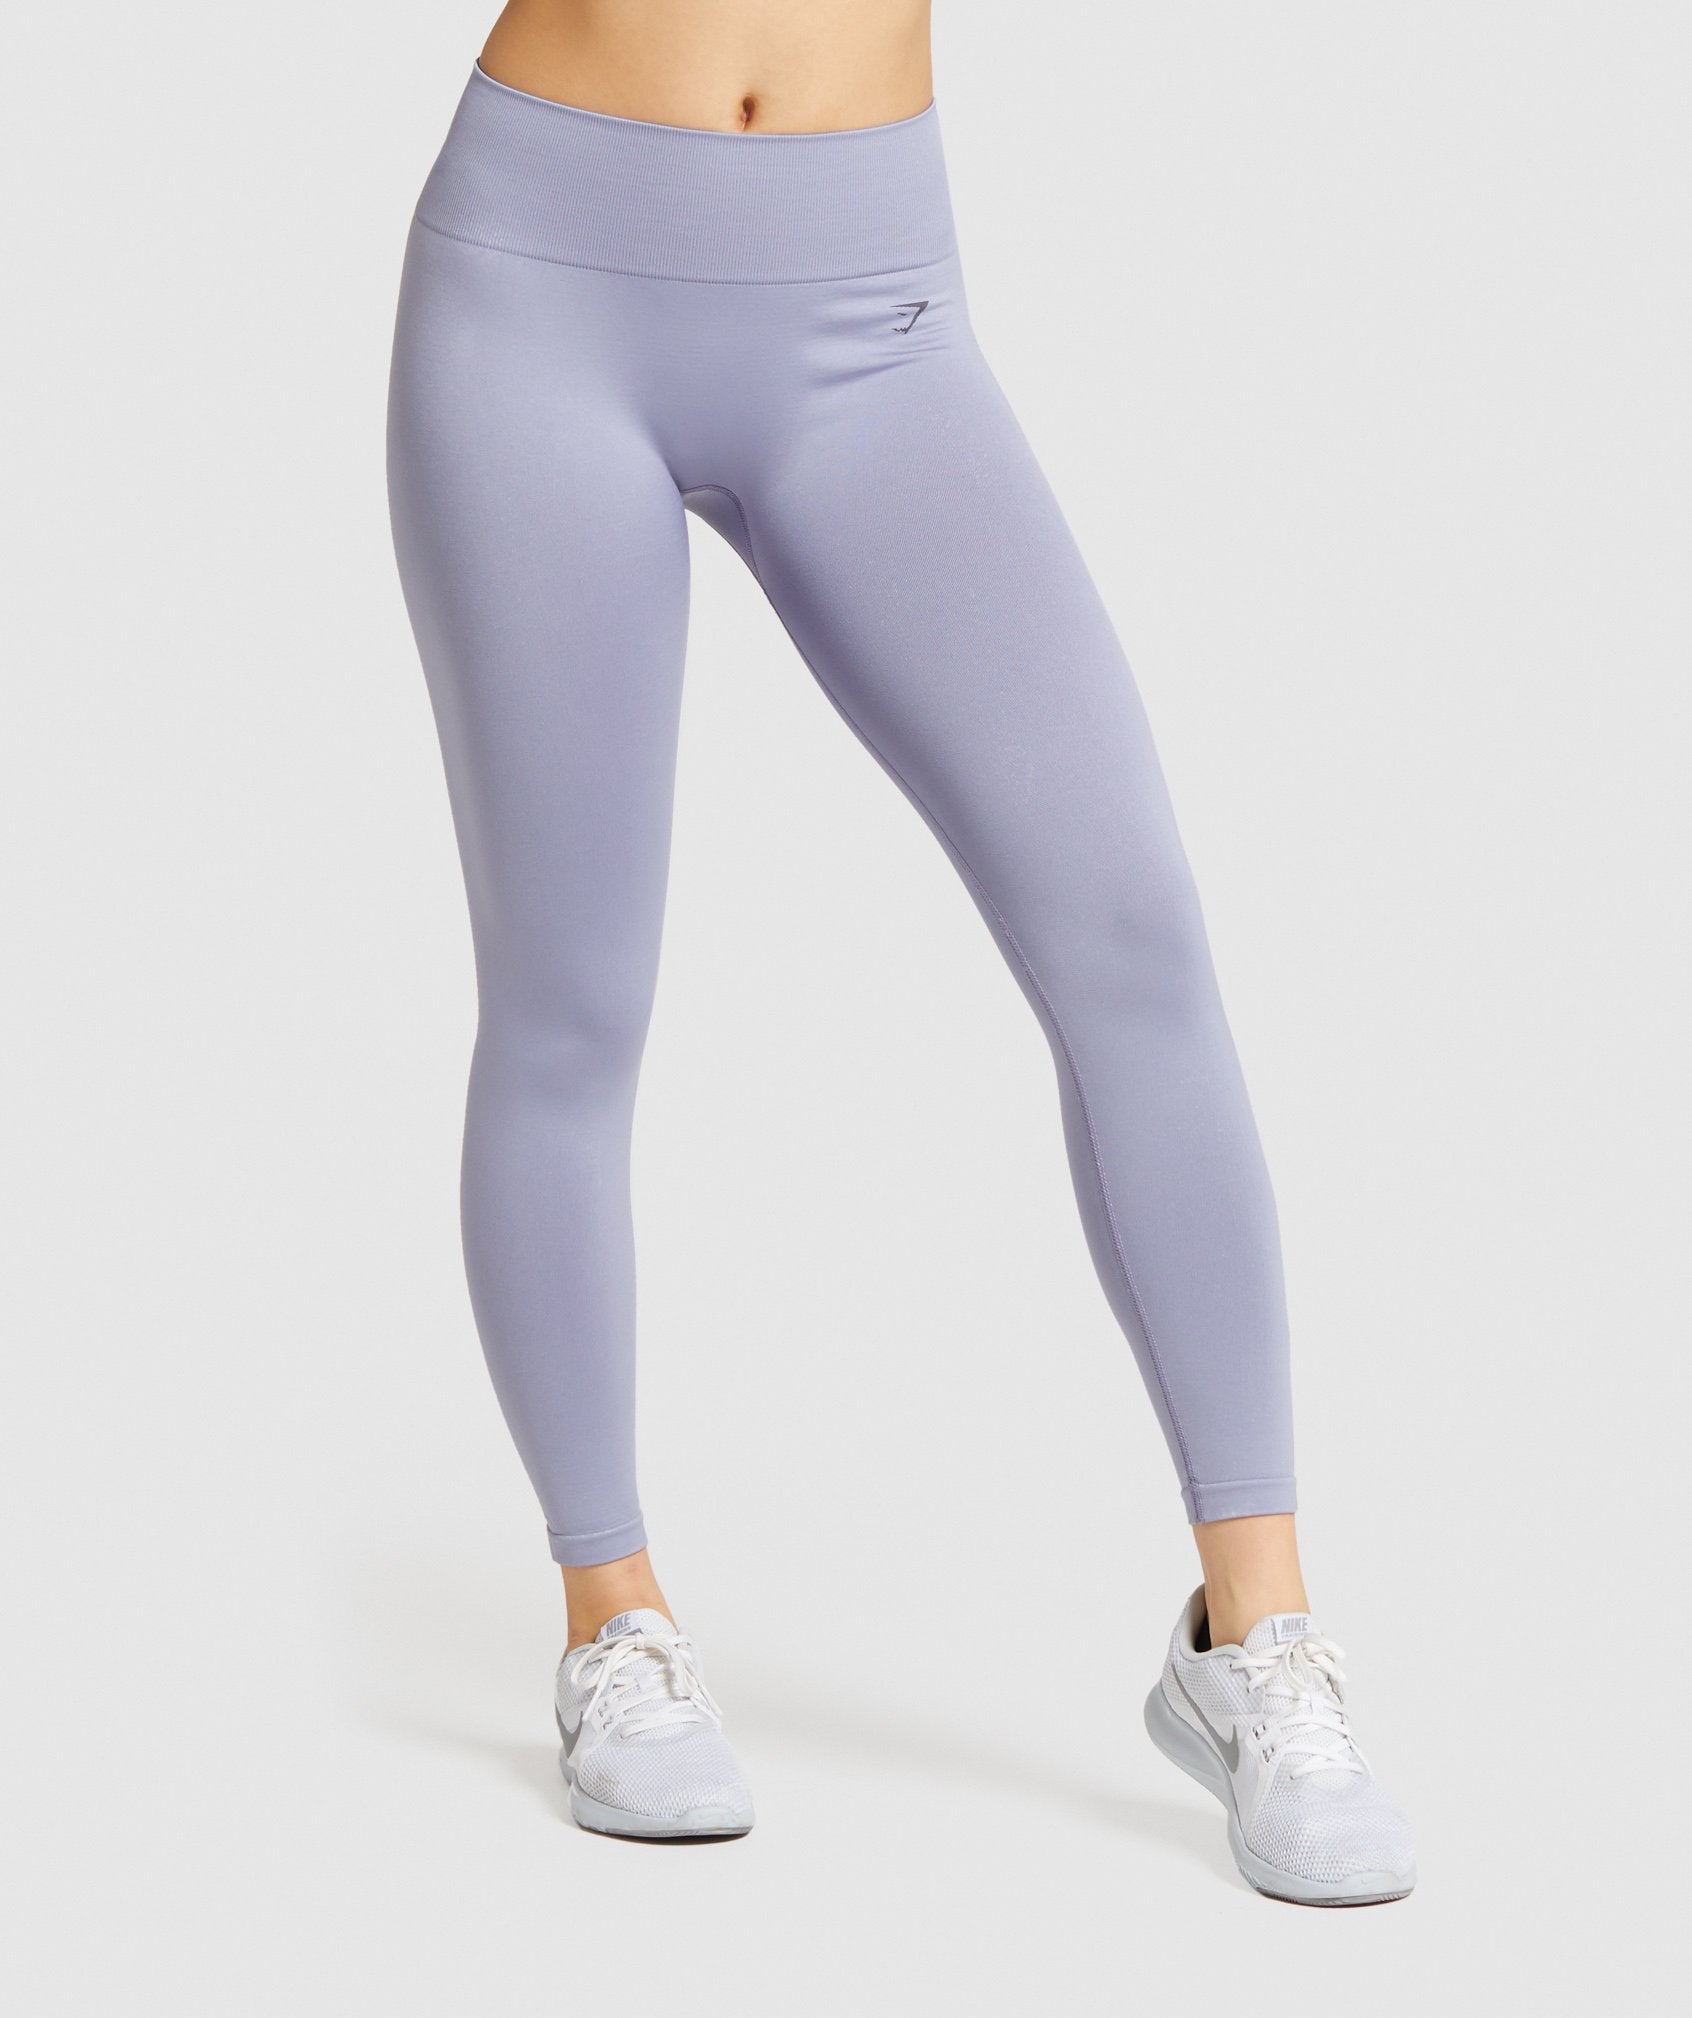 Fit Seamless Mid Rise Leggings in Blue/Charcoal